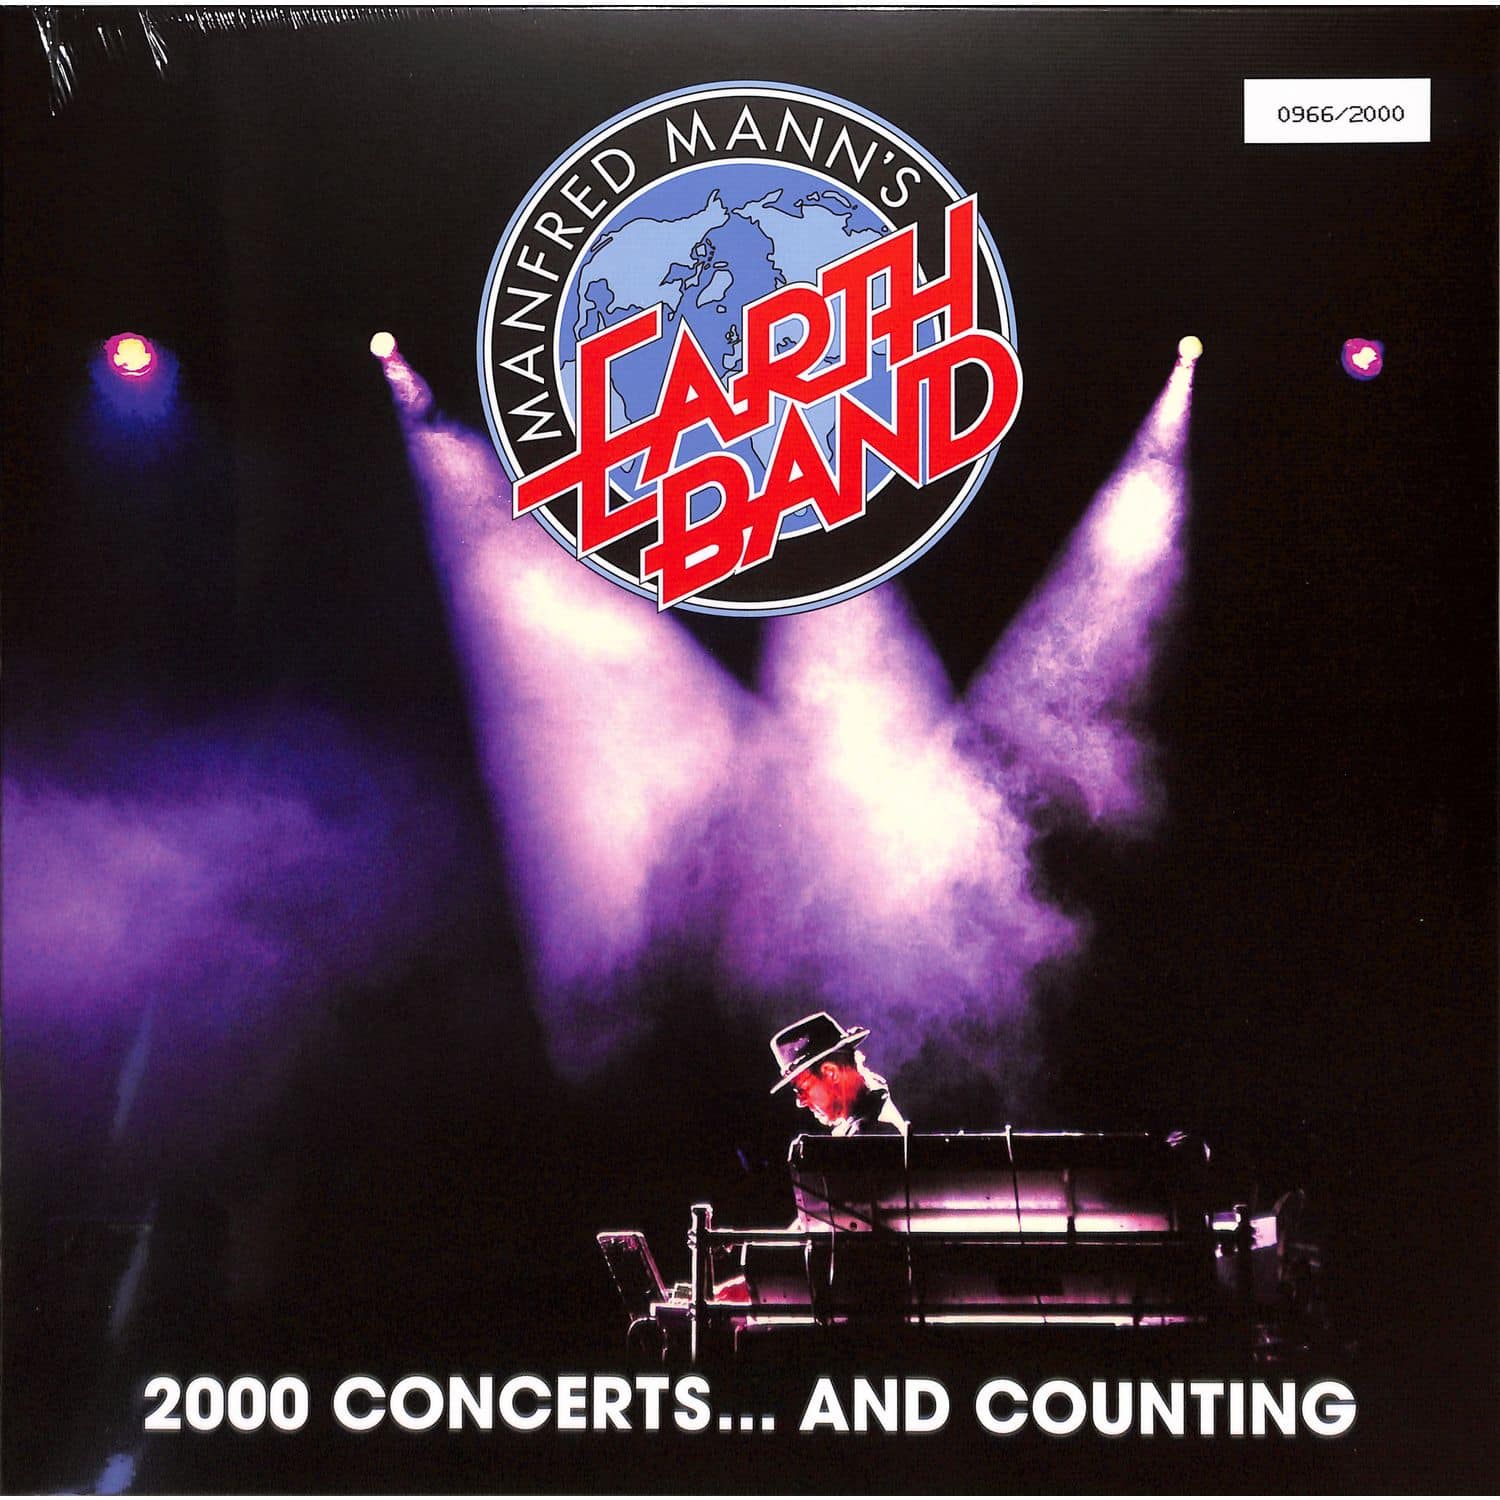 Manfred Mann s Earth Band - 2000 CONCERTS...AND COUNTING 